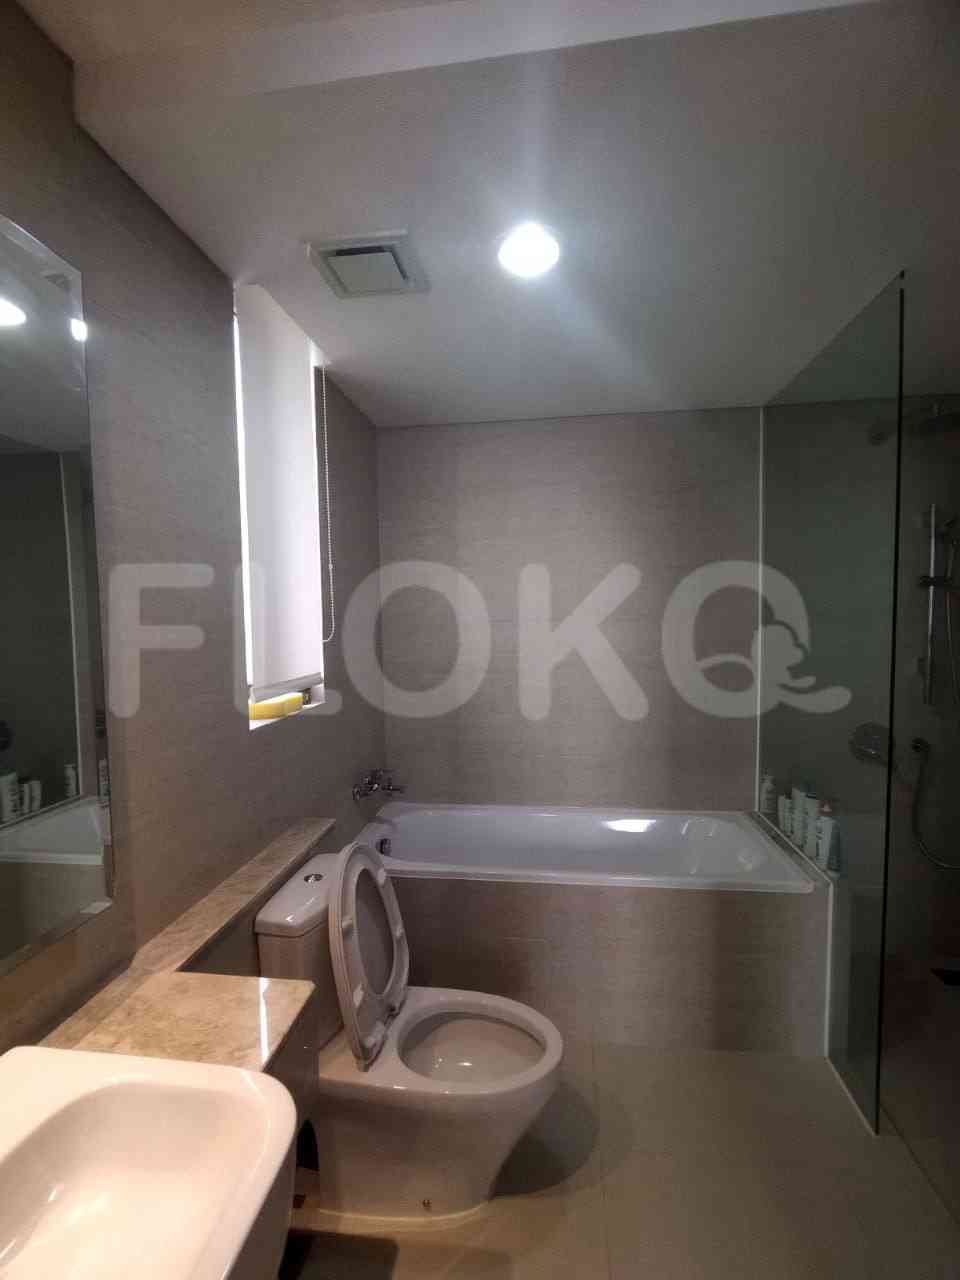 3 Bedroom on 25th Floor for Rent in Gold Coast Apartment - fka8f3 11